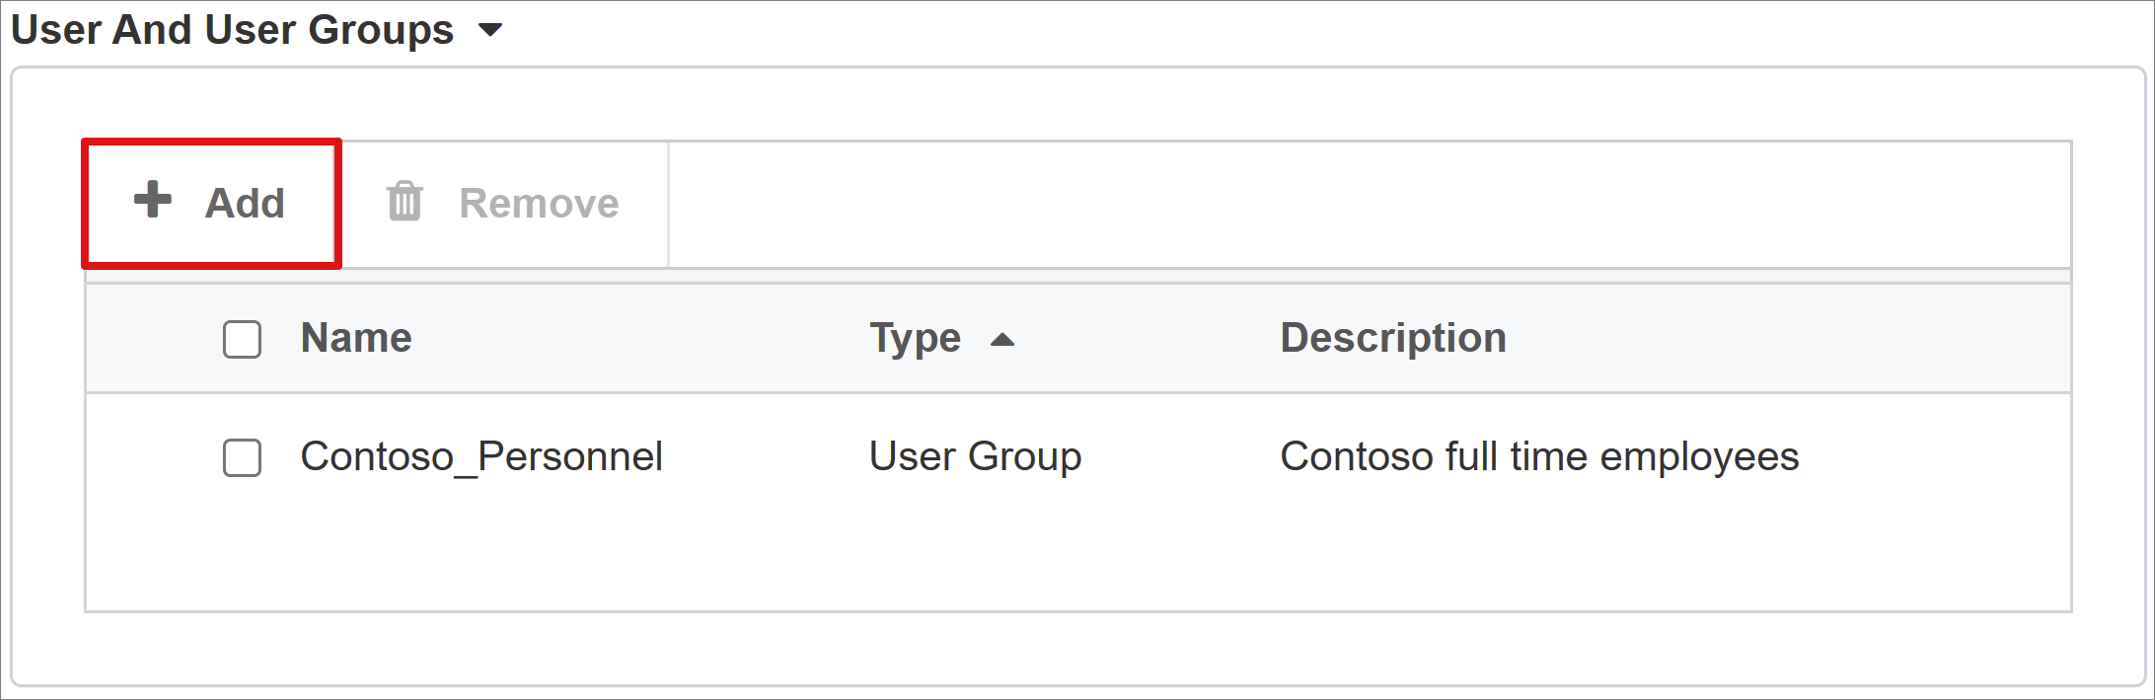 Screenshot of the Add option on User and User Groups.